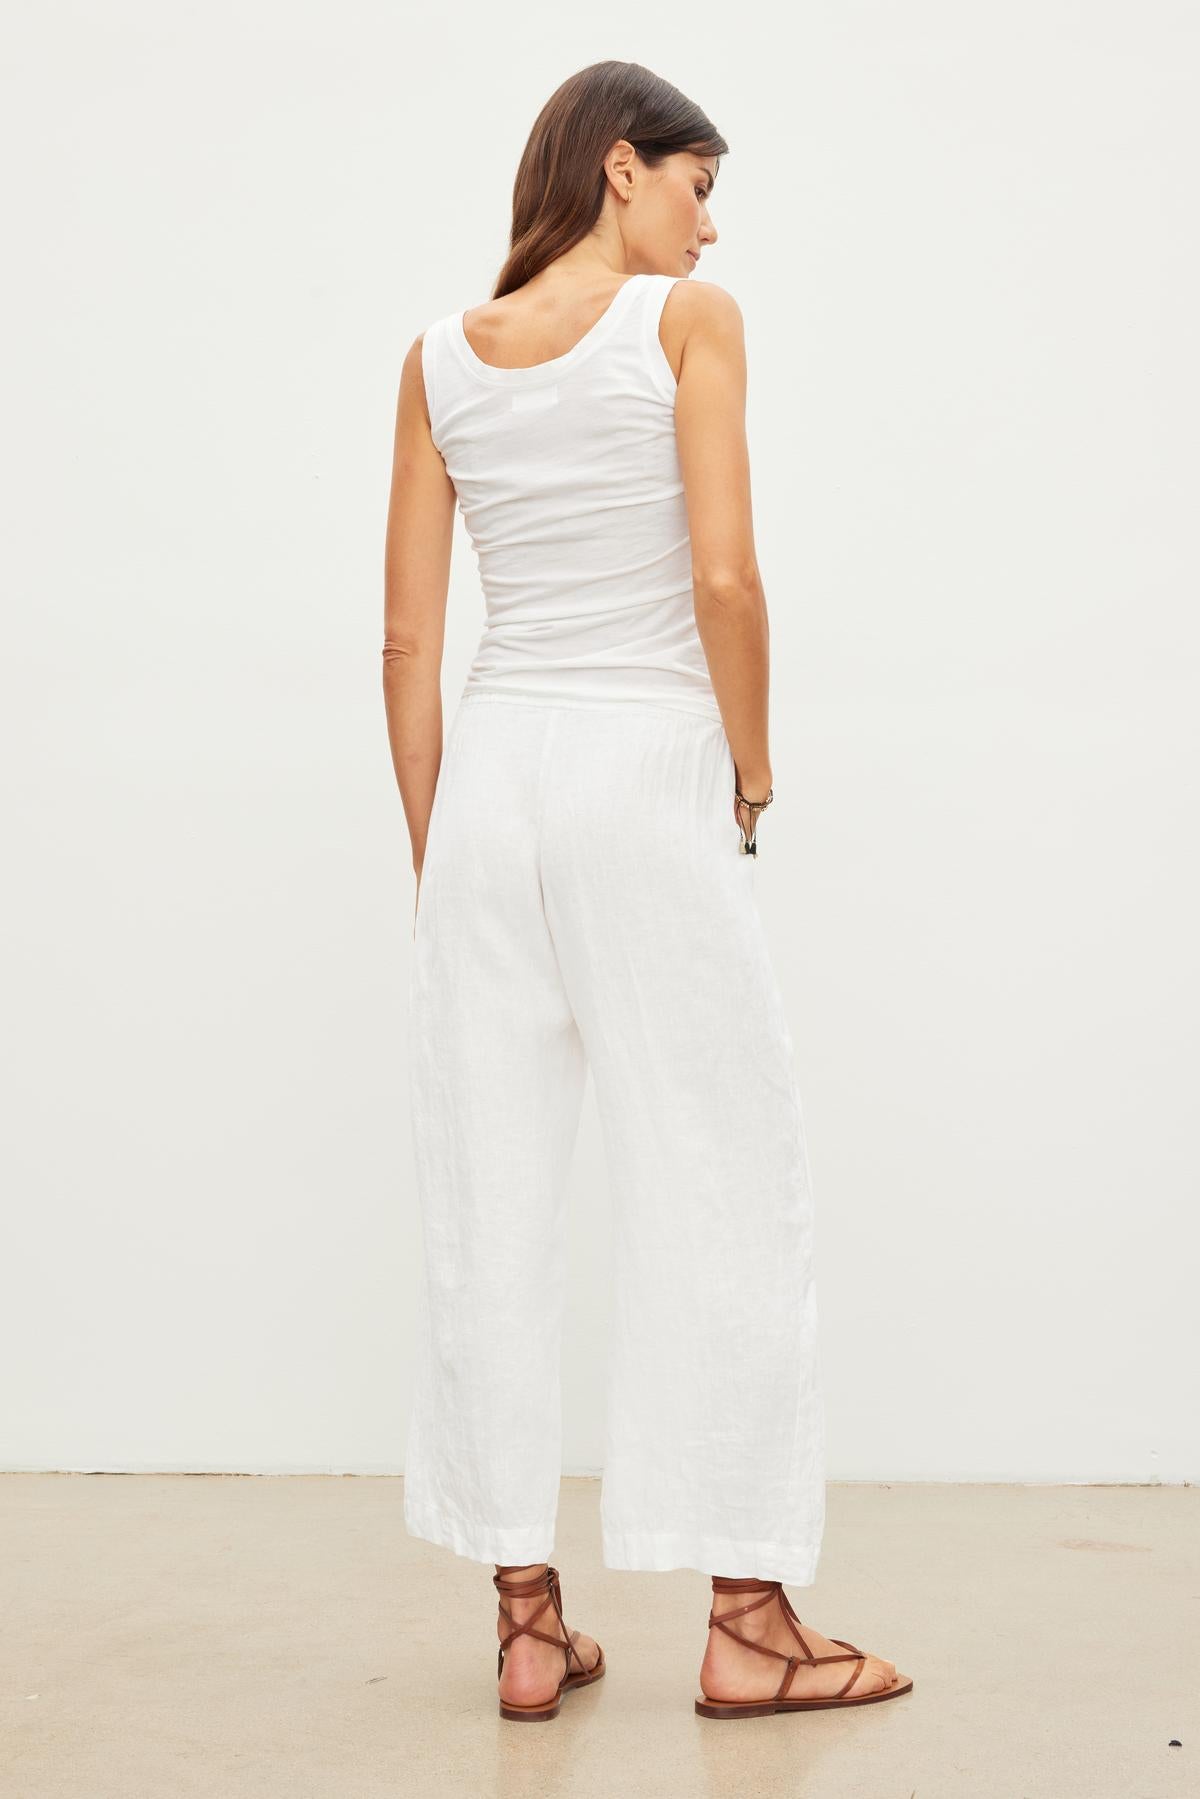 A woman stands facing away from the camera, wearing a white sleeveless top, LOLA LINEN PANT by Velvet by Graham & Spencer, and brown sandals. She is positioned against a plain white background.-36161692664001